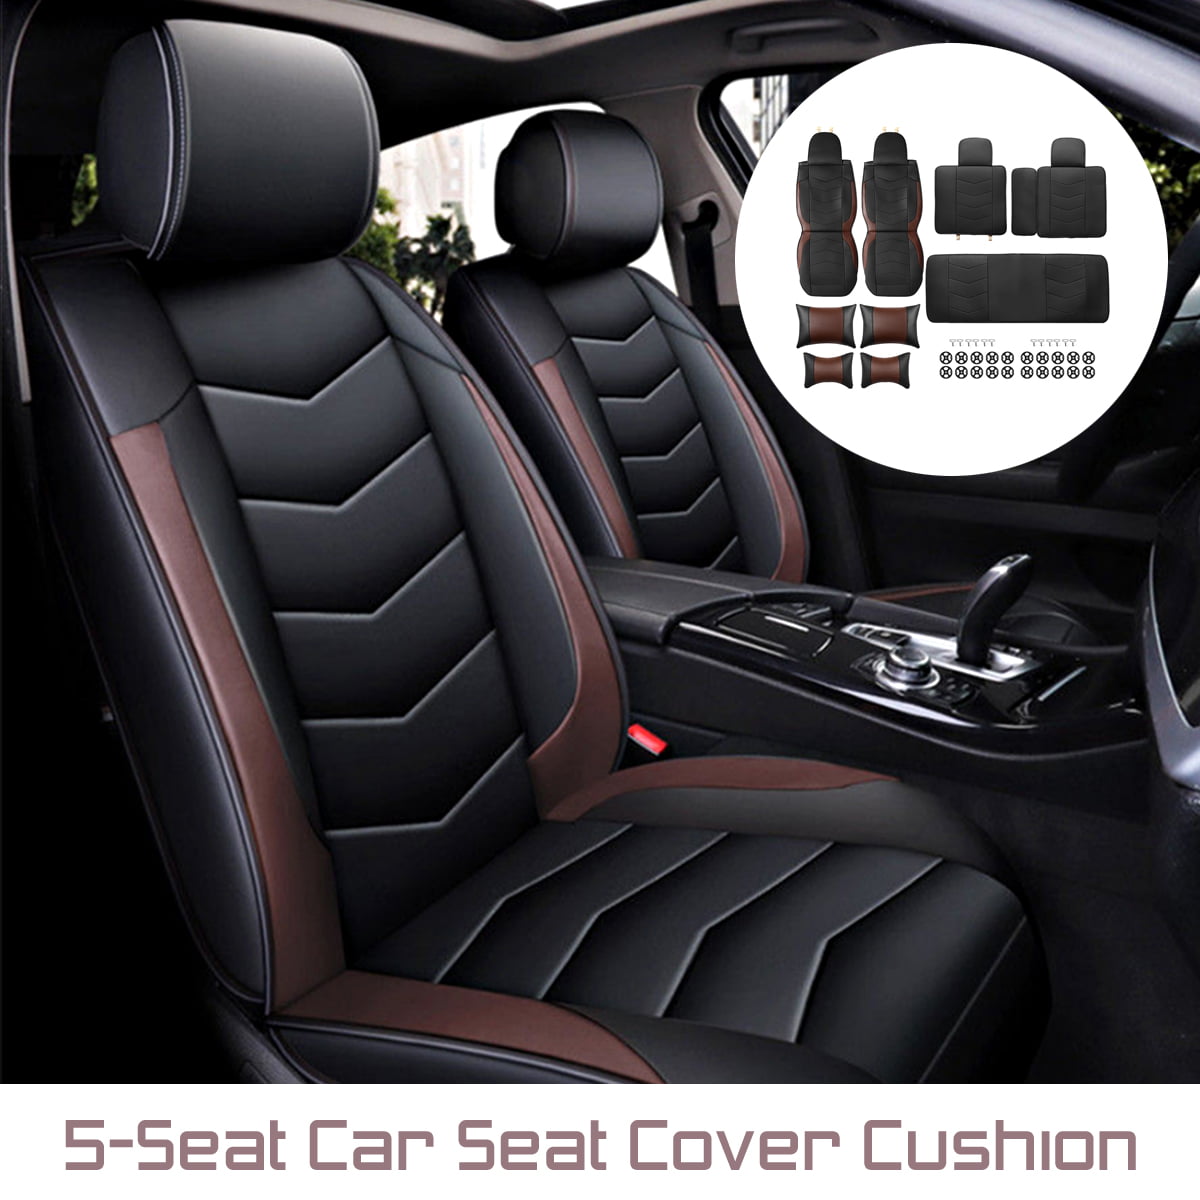 Black & Red Car Seat Covers Luxury PU Leather Interior Full Coverage Universal